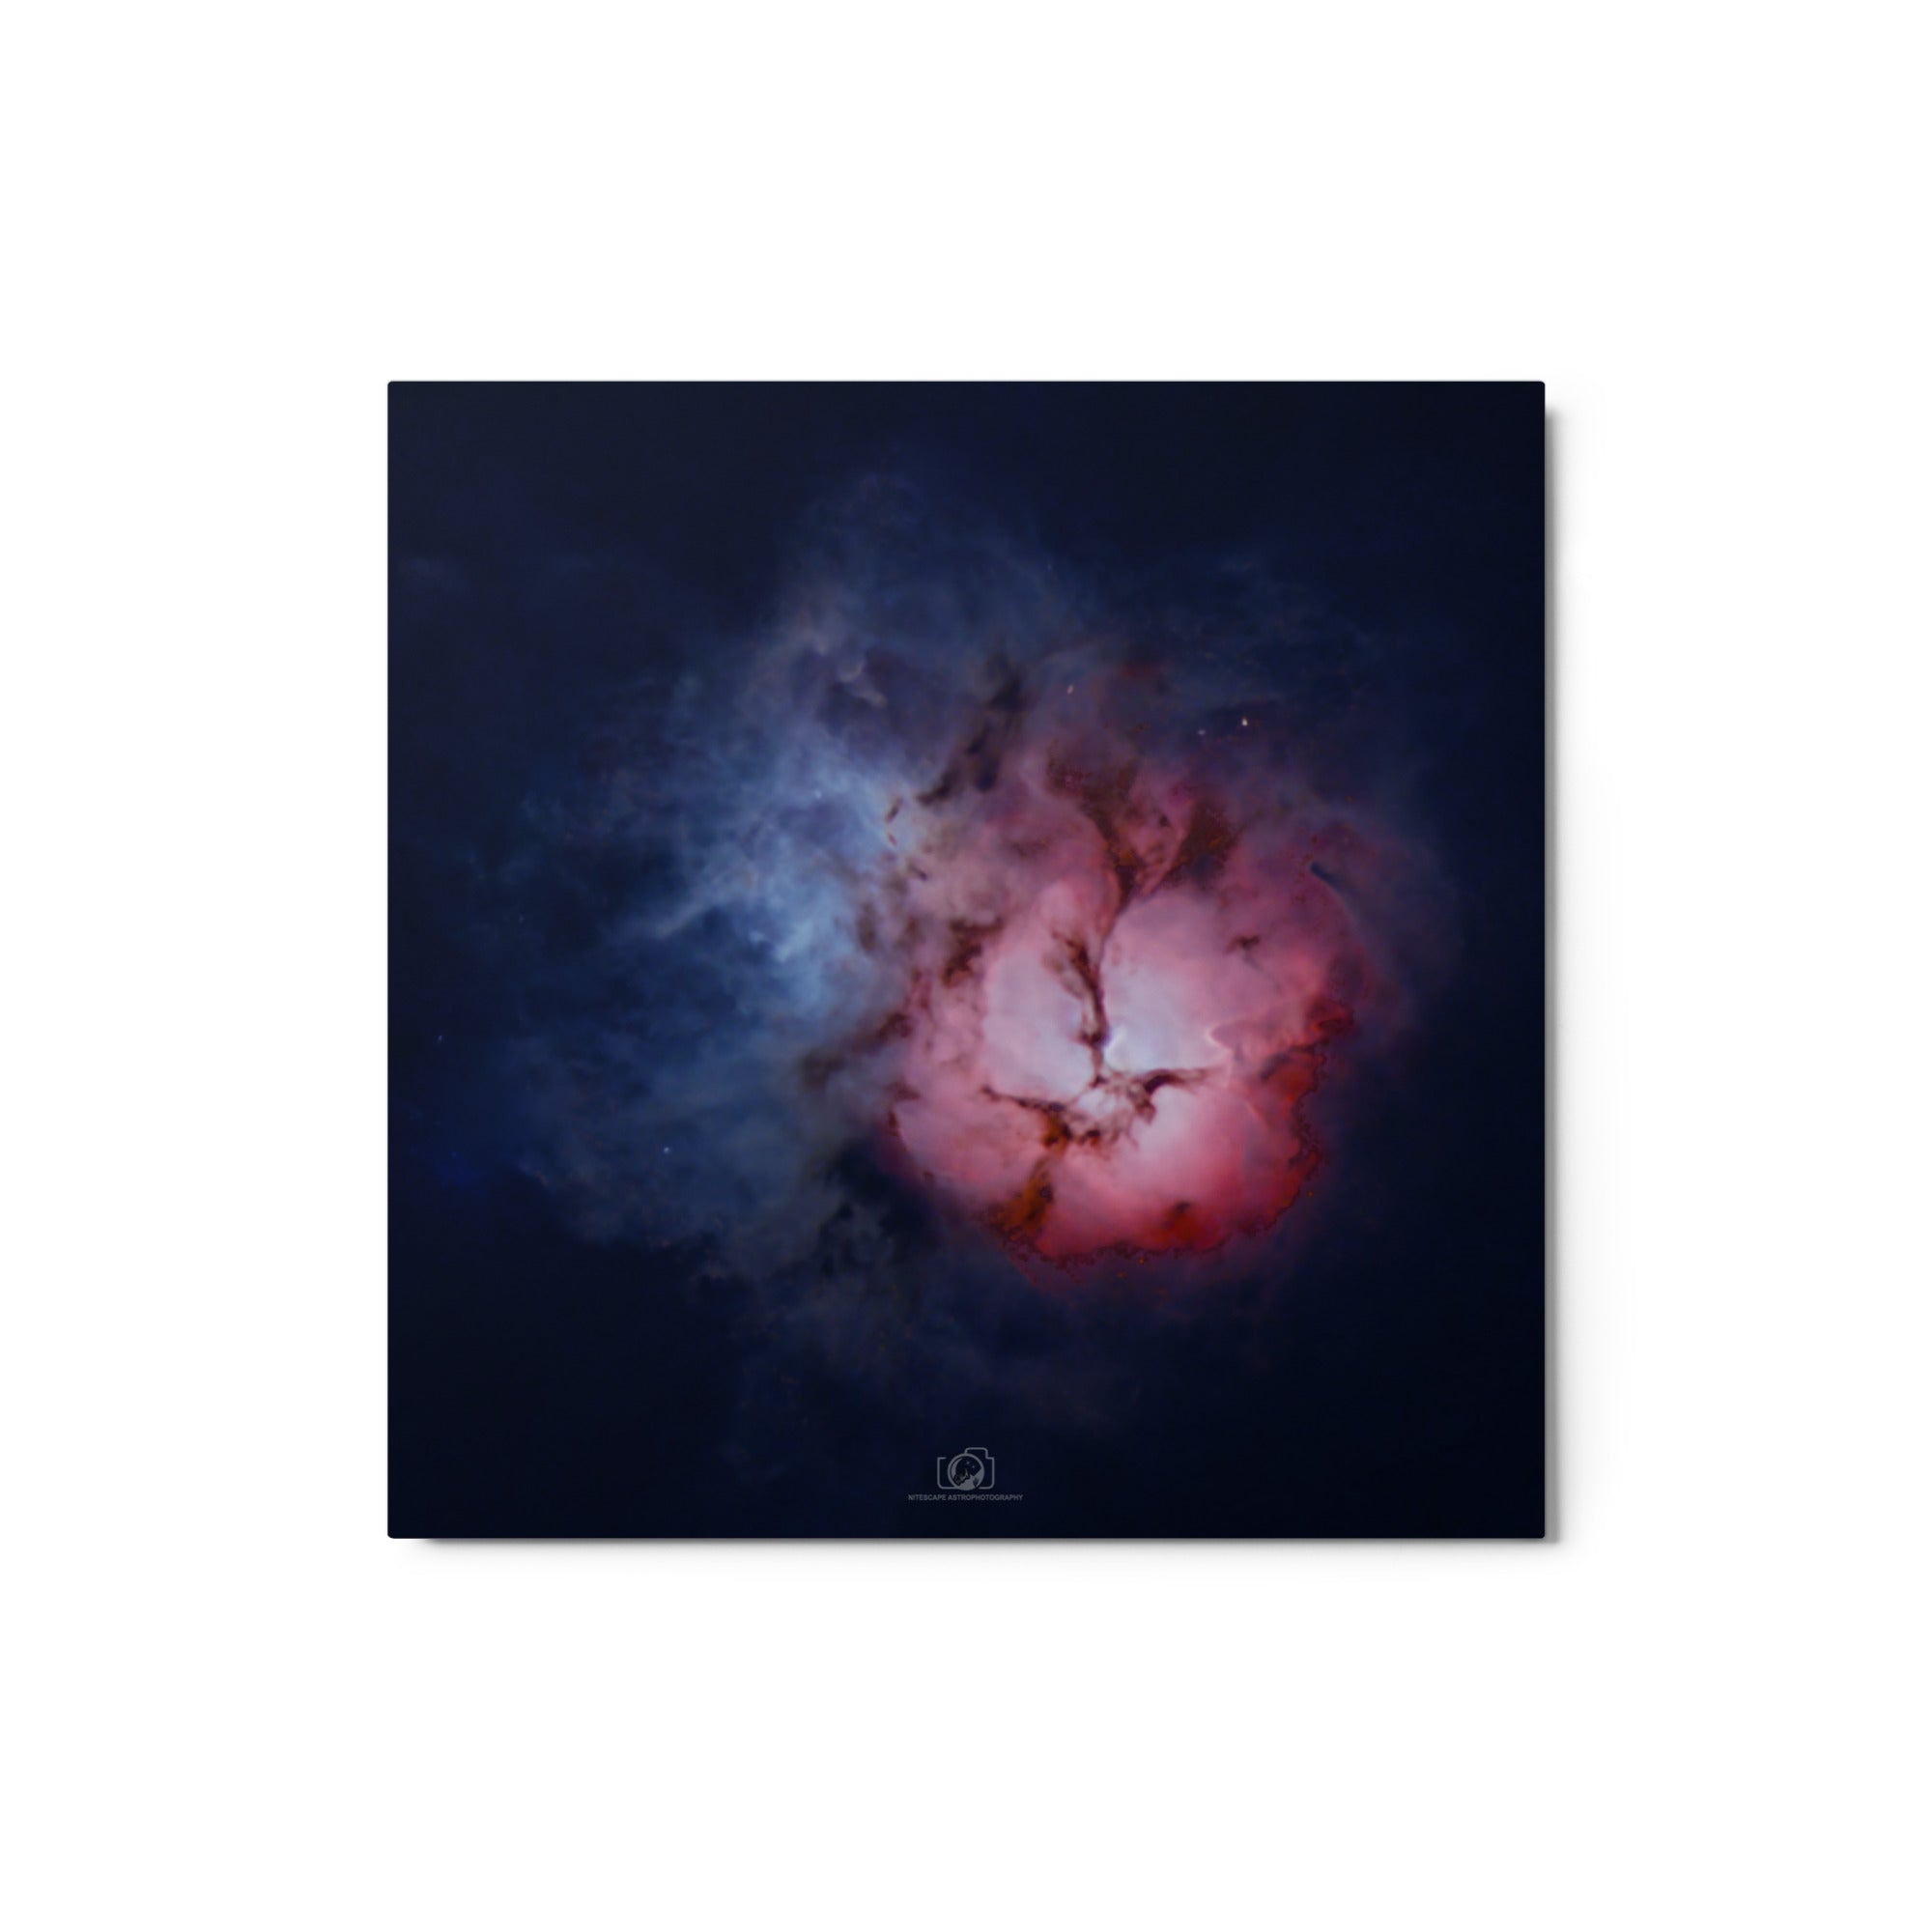 A captivating image of the Trifid Nebula, a stunning celestial formation located in the constellation of Sagittarius. The nebula exhibits a unique trifurcated appearance, with intricate swirls of gas and dust in vibrant shades of red, blue, and pink. This cosmic masterpiece showcases a blend of emission, reflection, and dark nebulae, providing a breathtaking glimpse into the celestial wonders that adorn our universe.